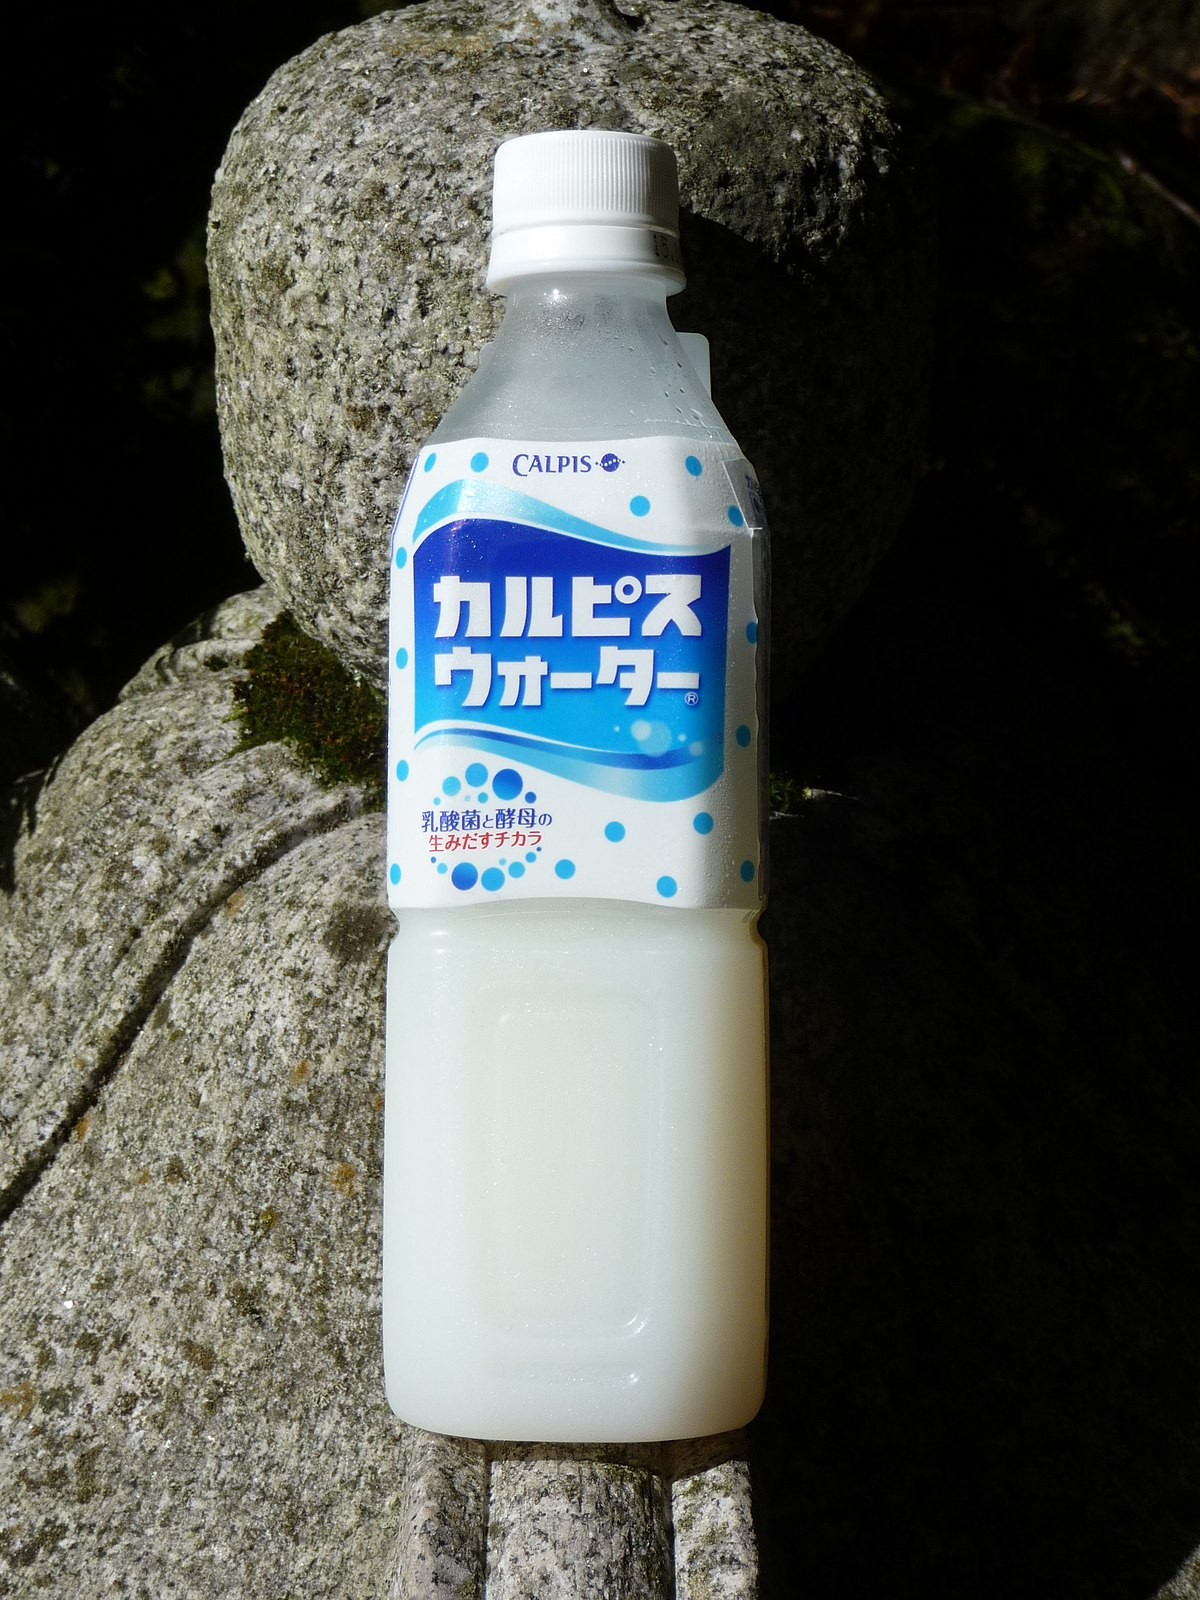 Cocktails by Calpis